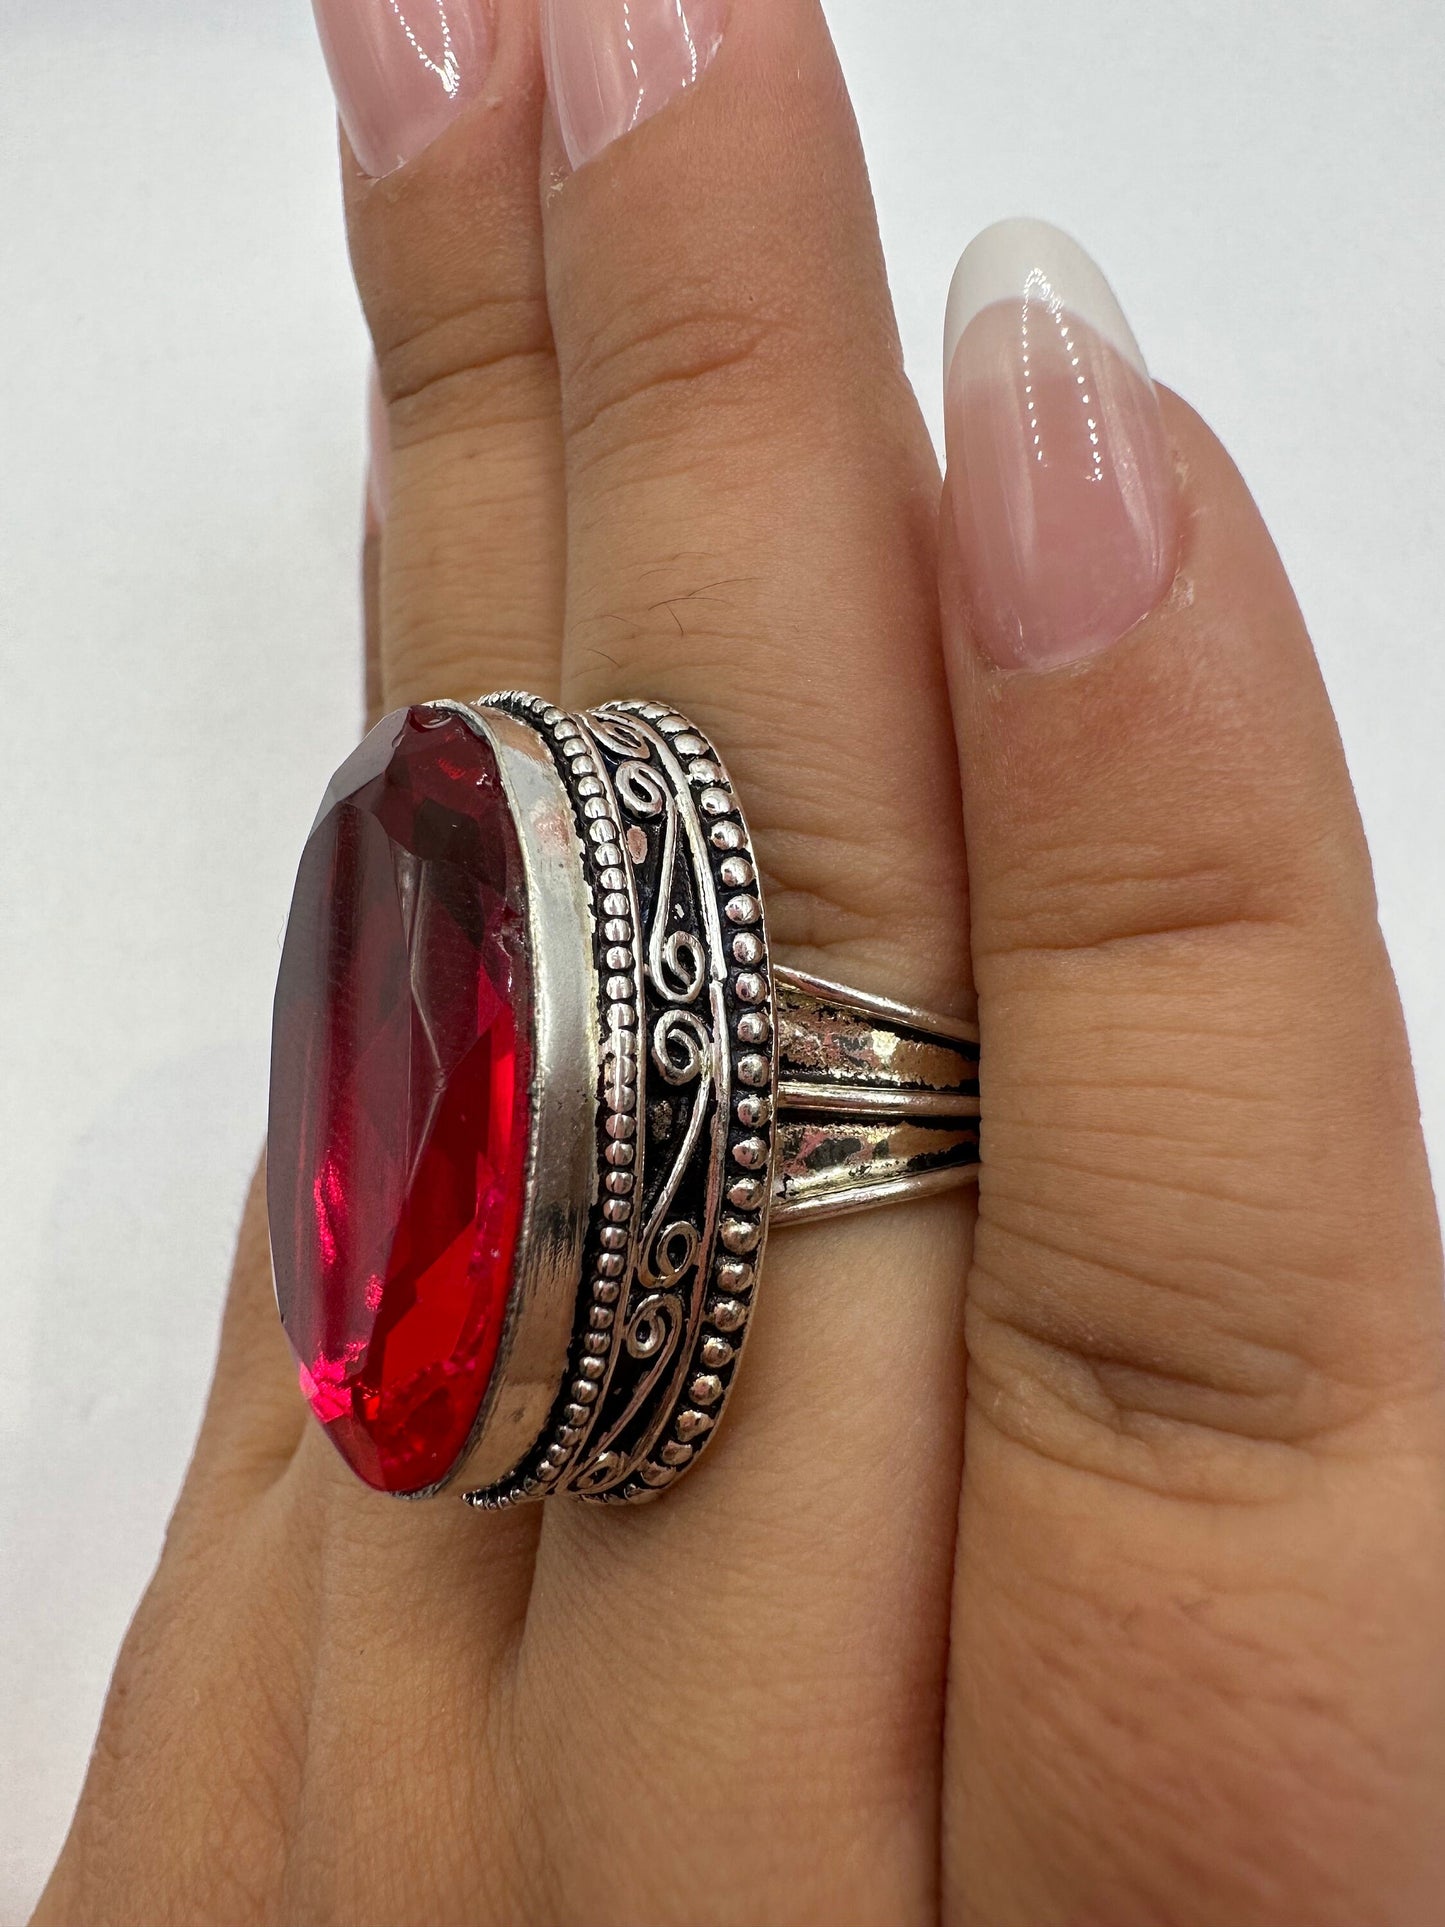 Vintage Red Ruby Glass White Bronze Silver Gothic Ring